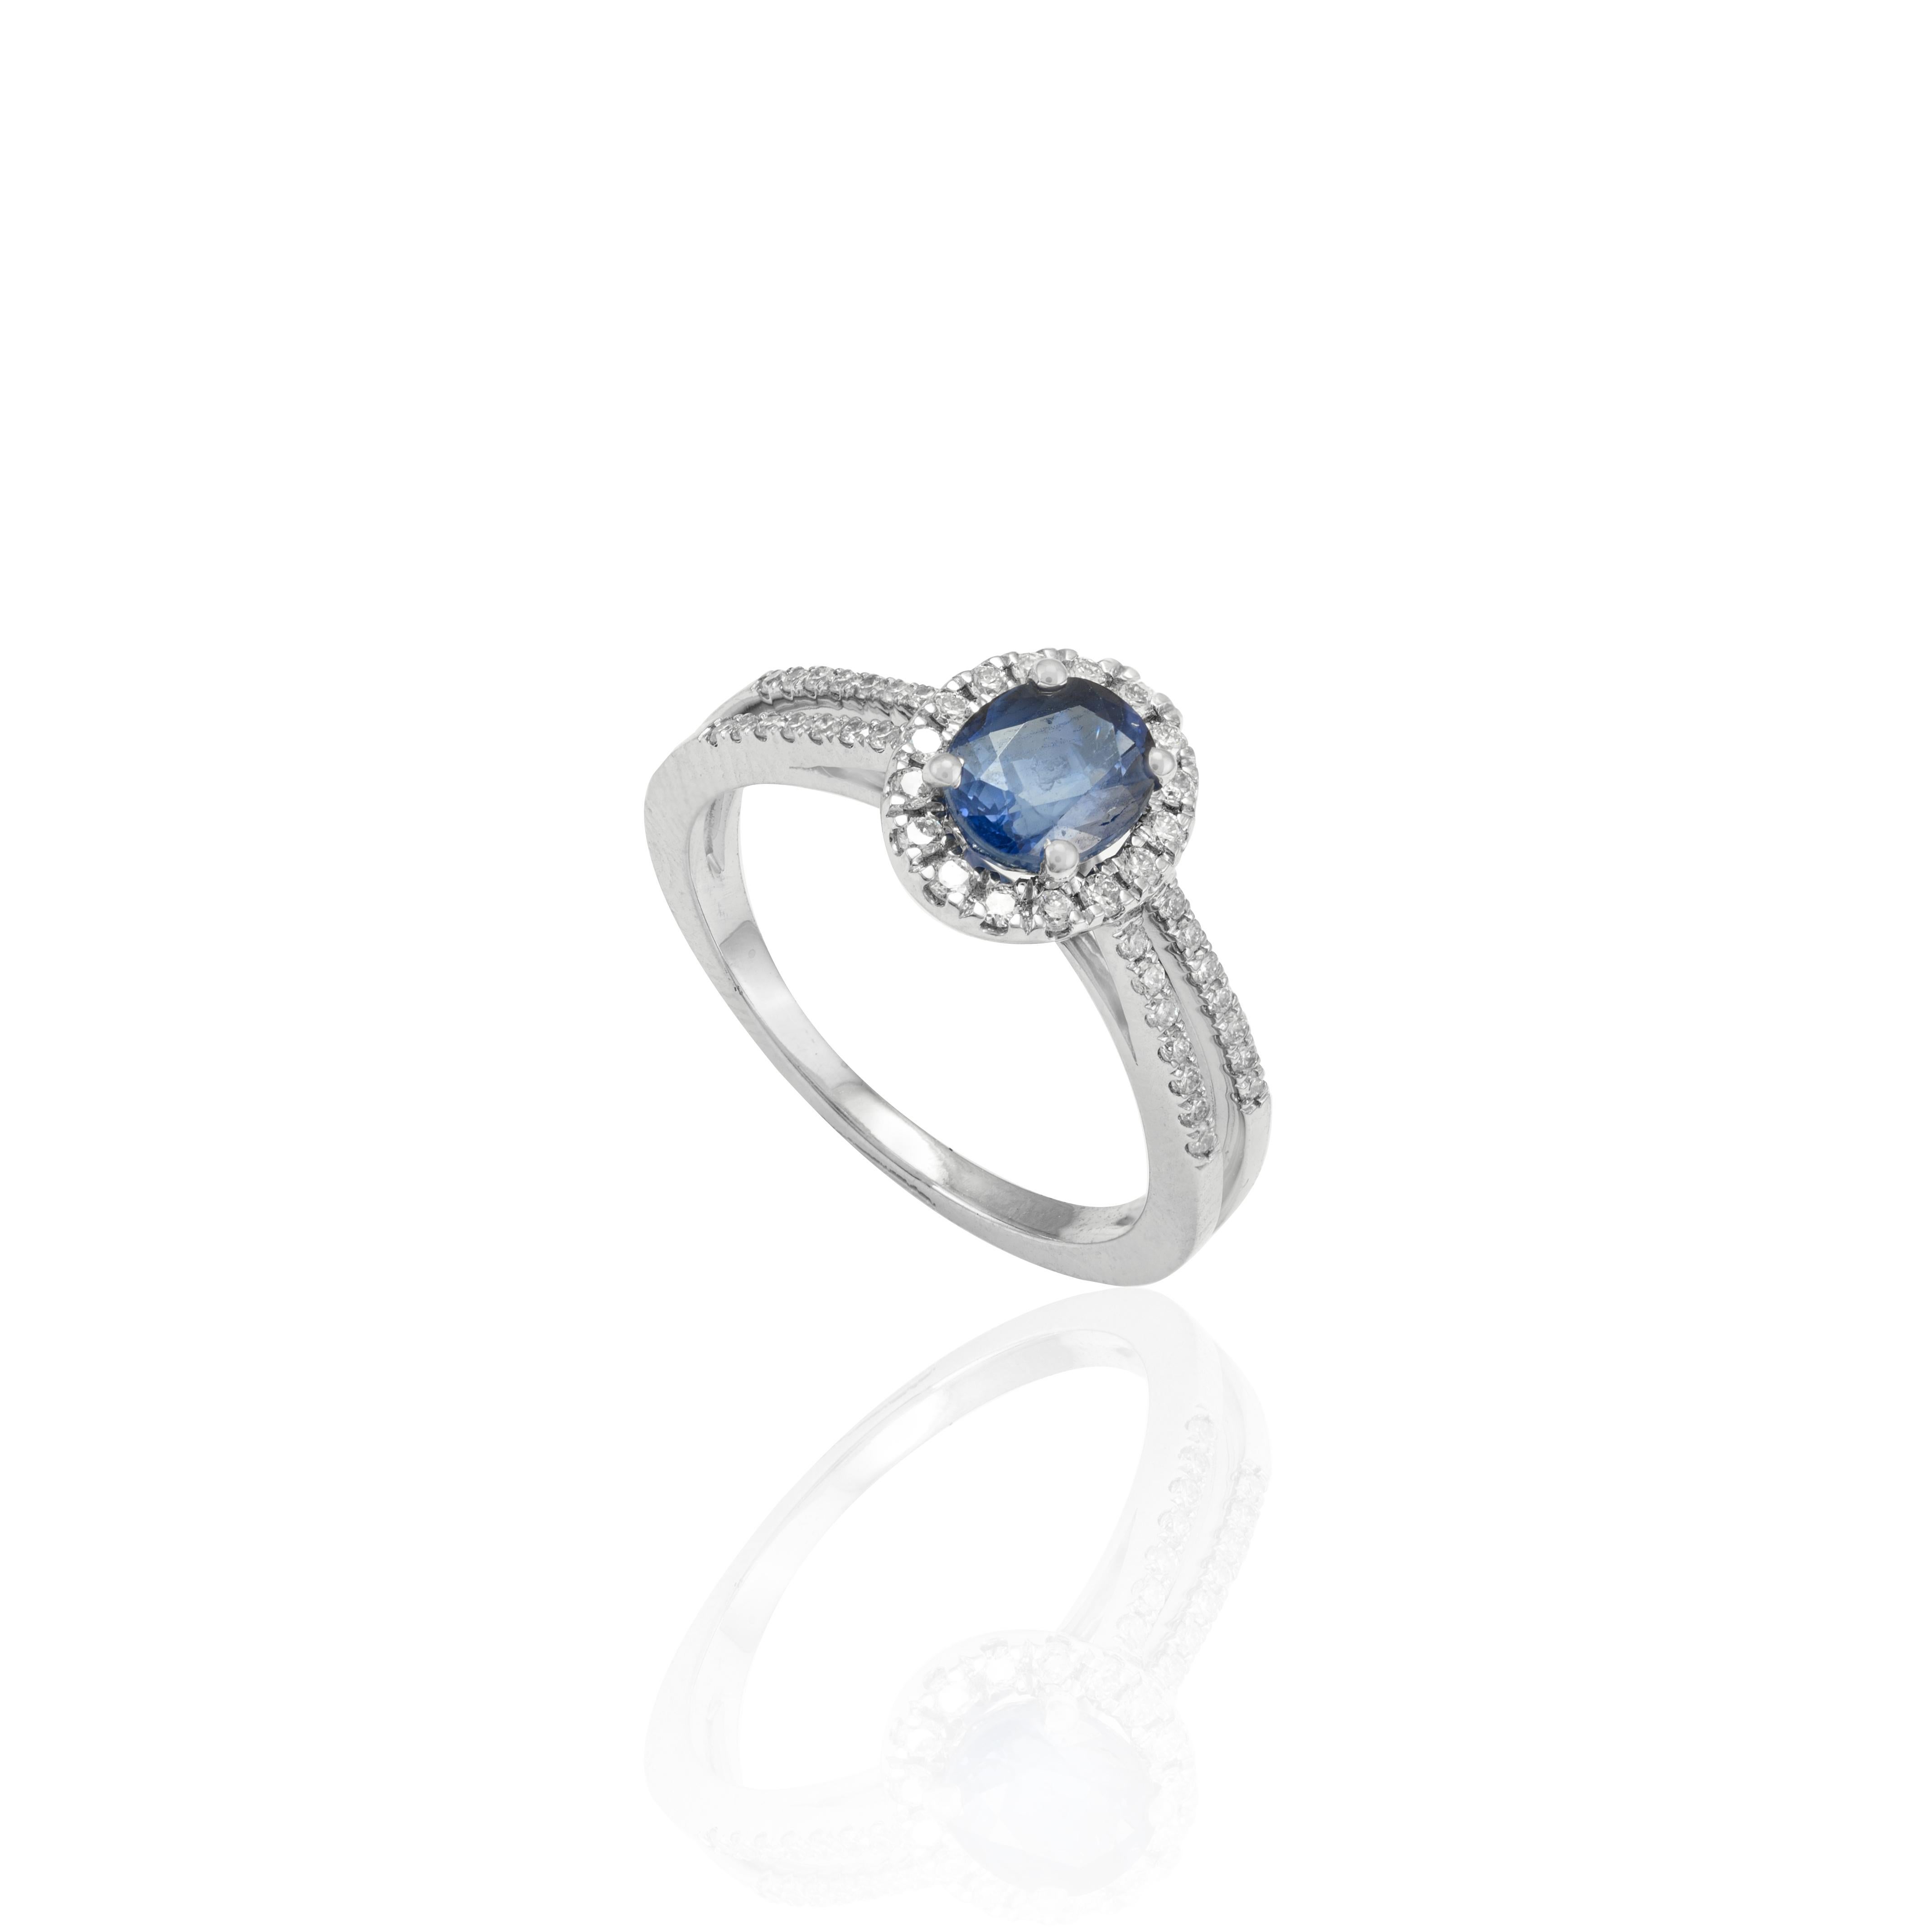 For Sale:  18k Solid White Gold Certified Blue Sapphire and Diamond Engagement Ring 3